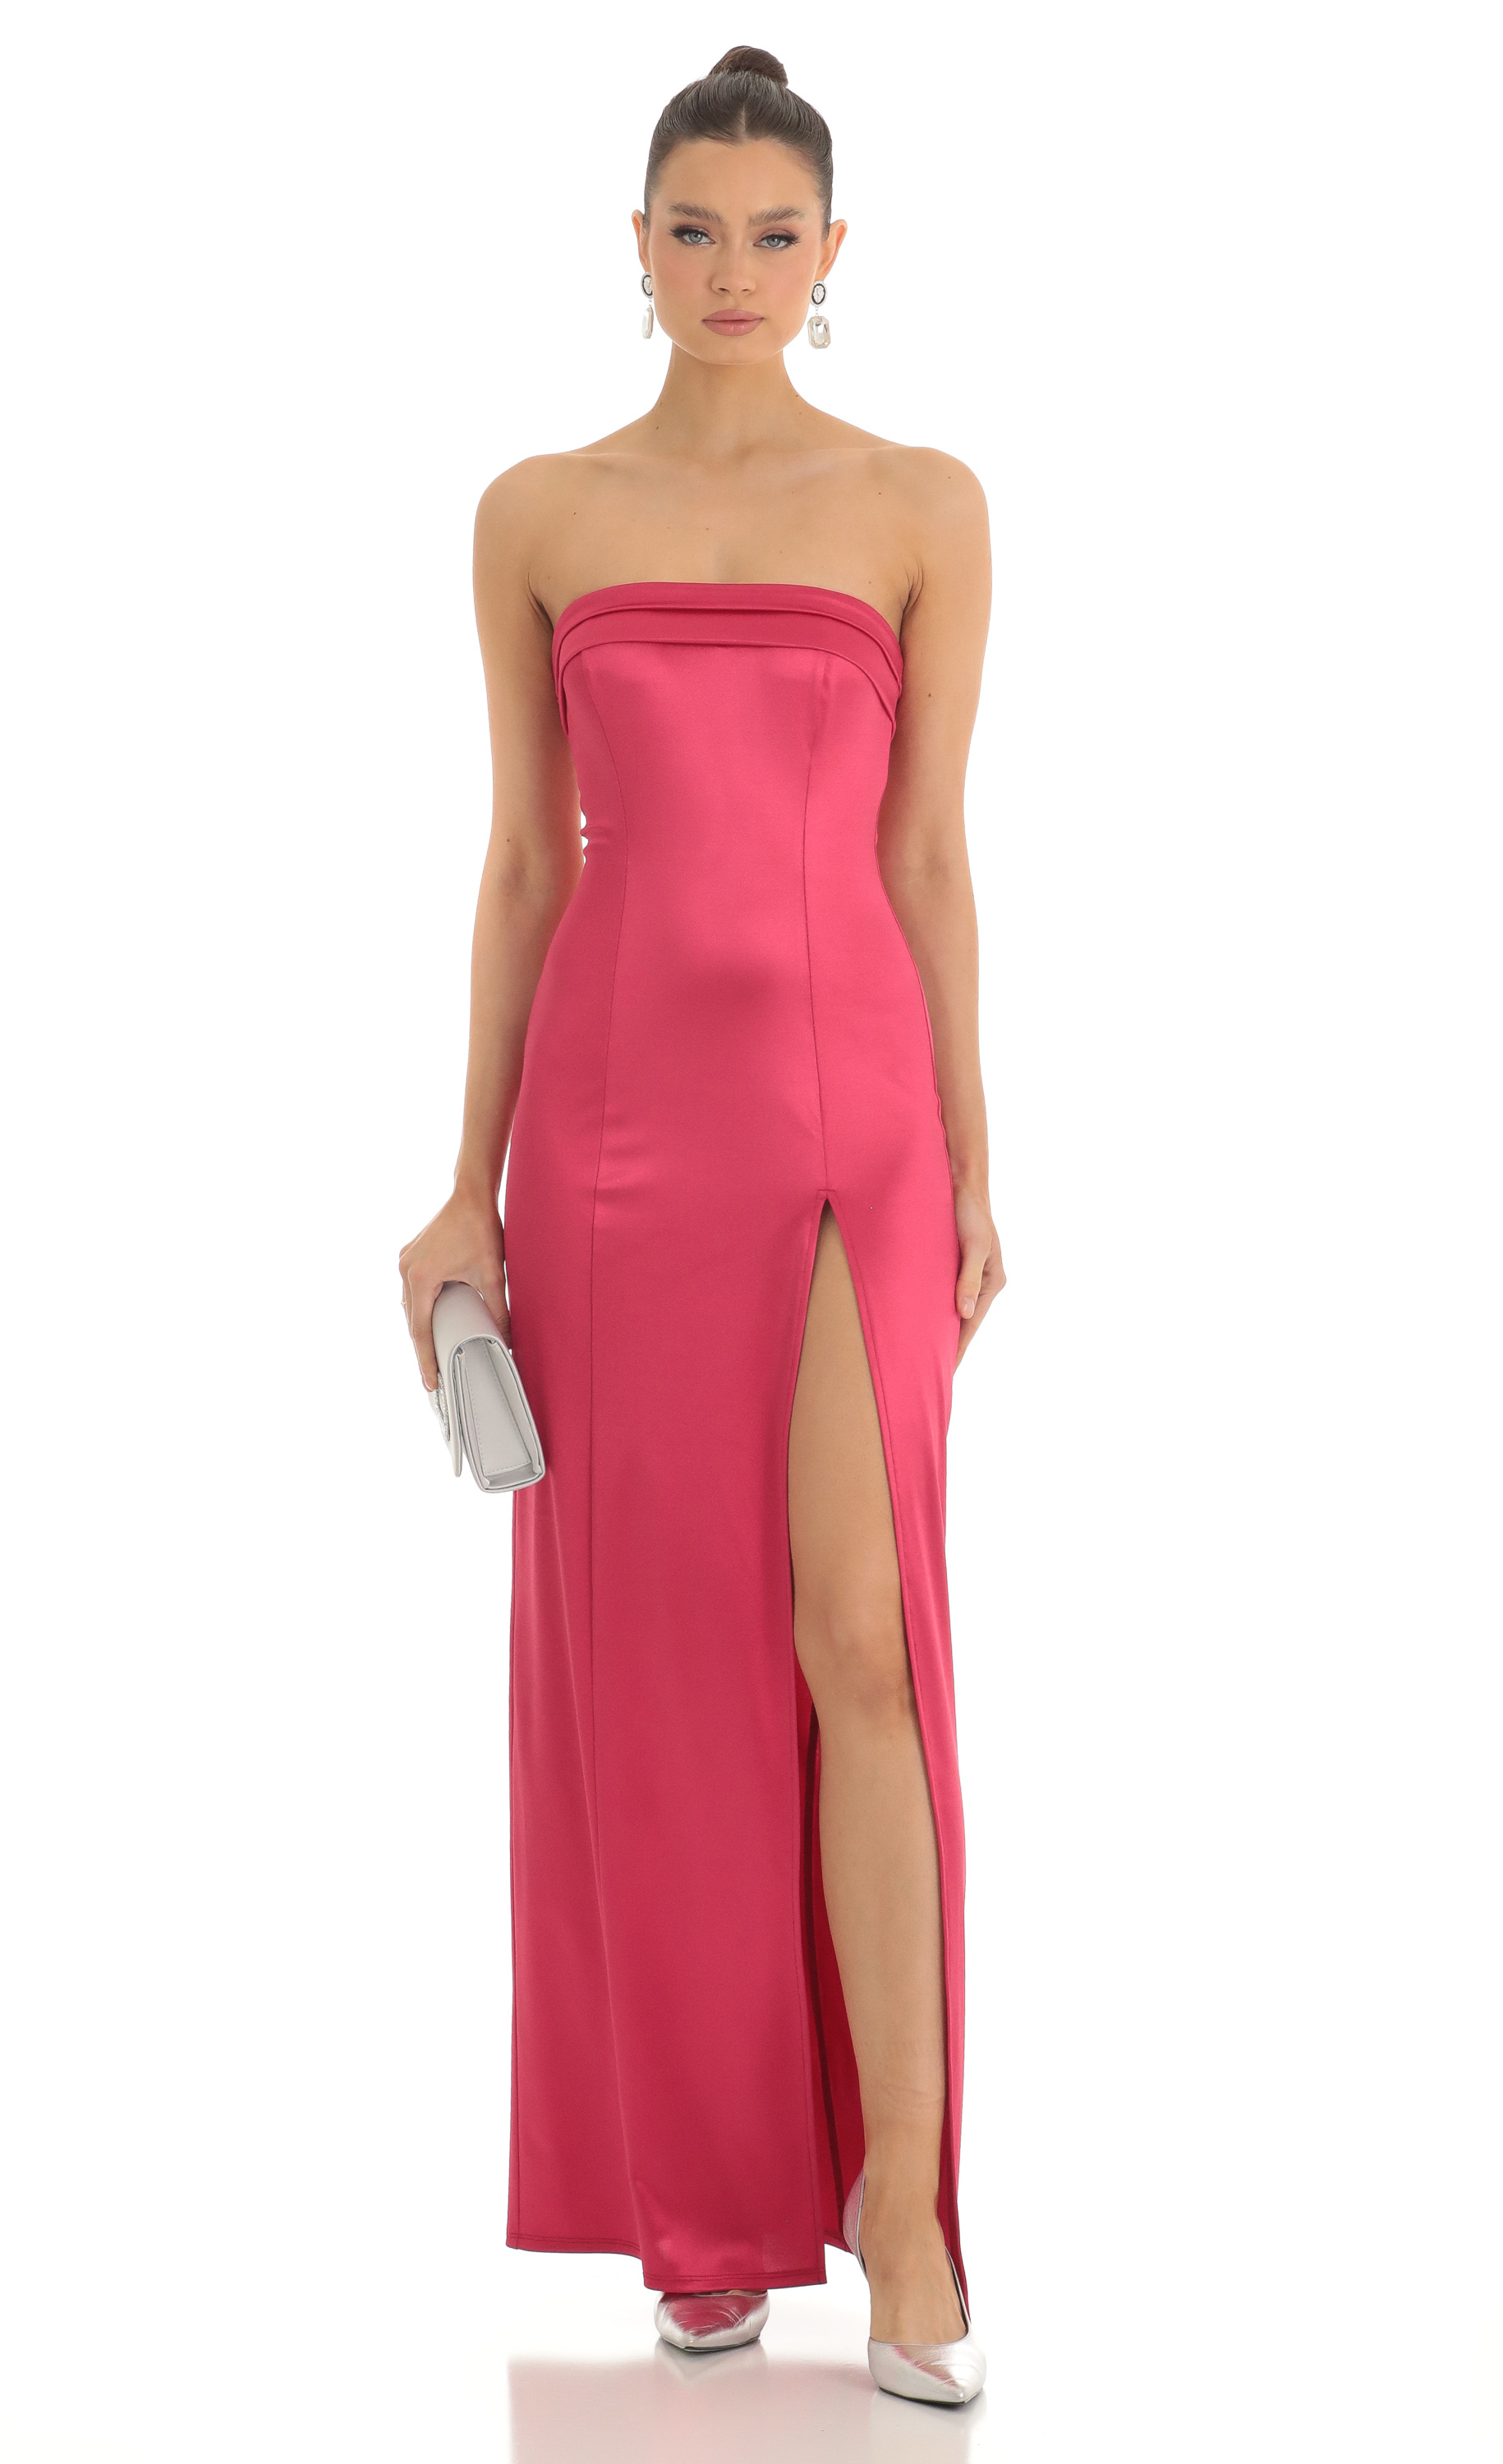 Satin Pleated Strapless Maxi Dress in Cherry